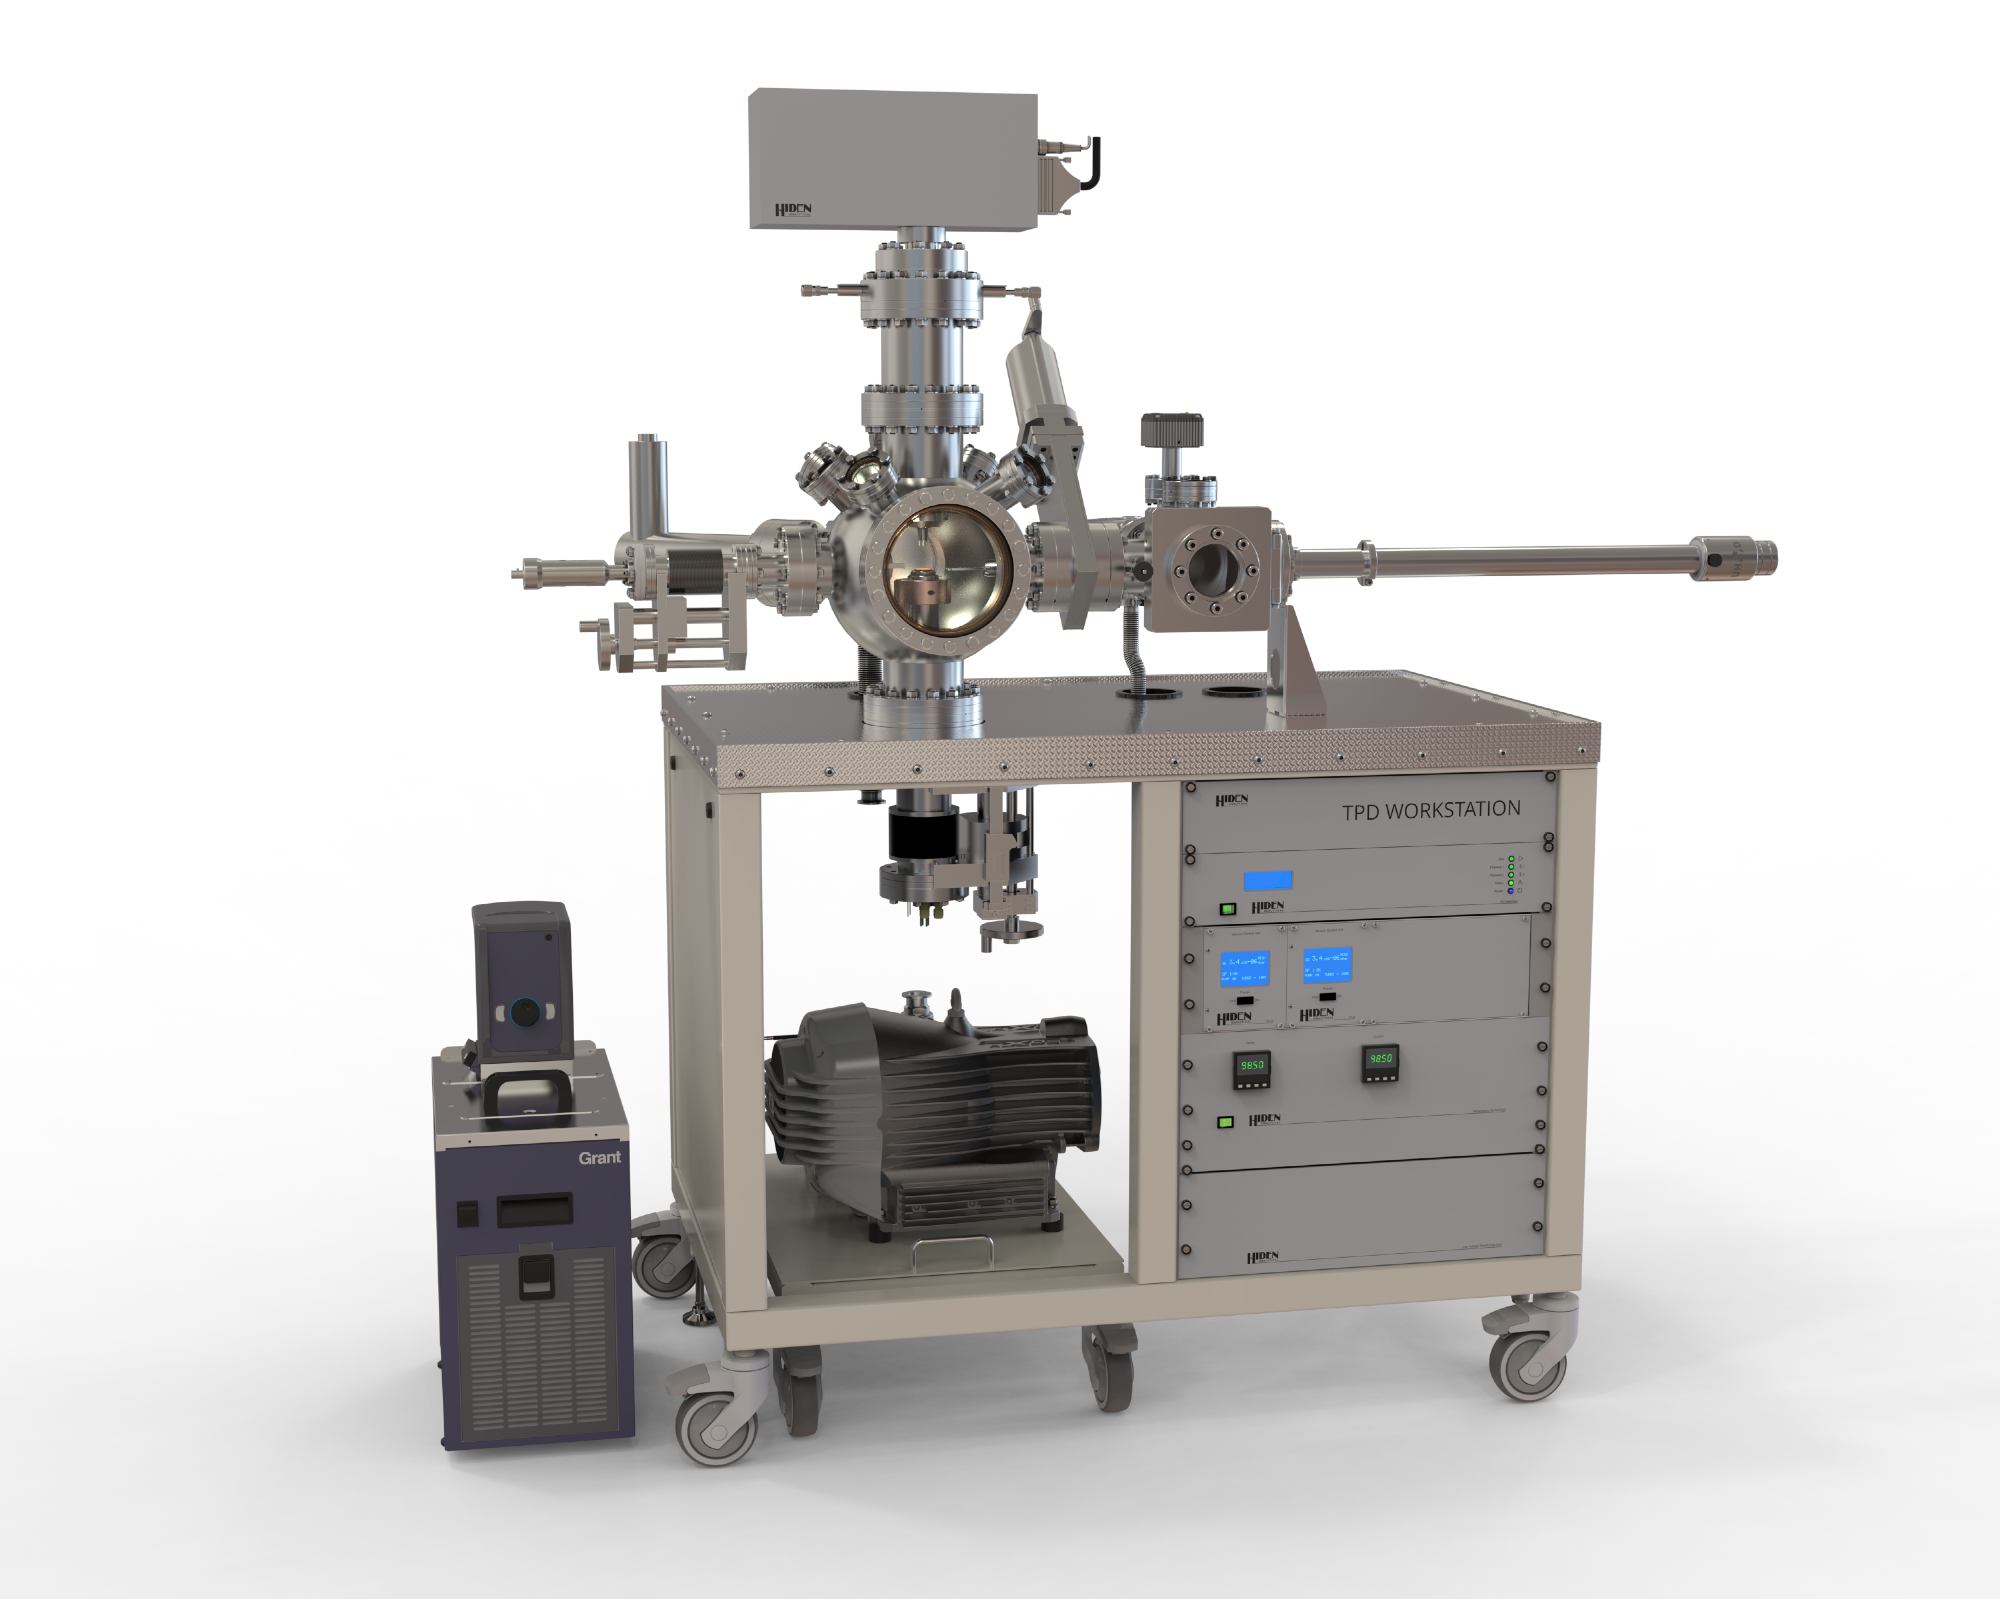 TPD Workstation with a Highly-Precise Analyzer, Heated Sample Stage and Multiport UHV Chamber